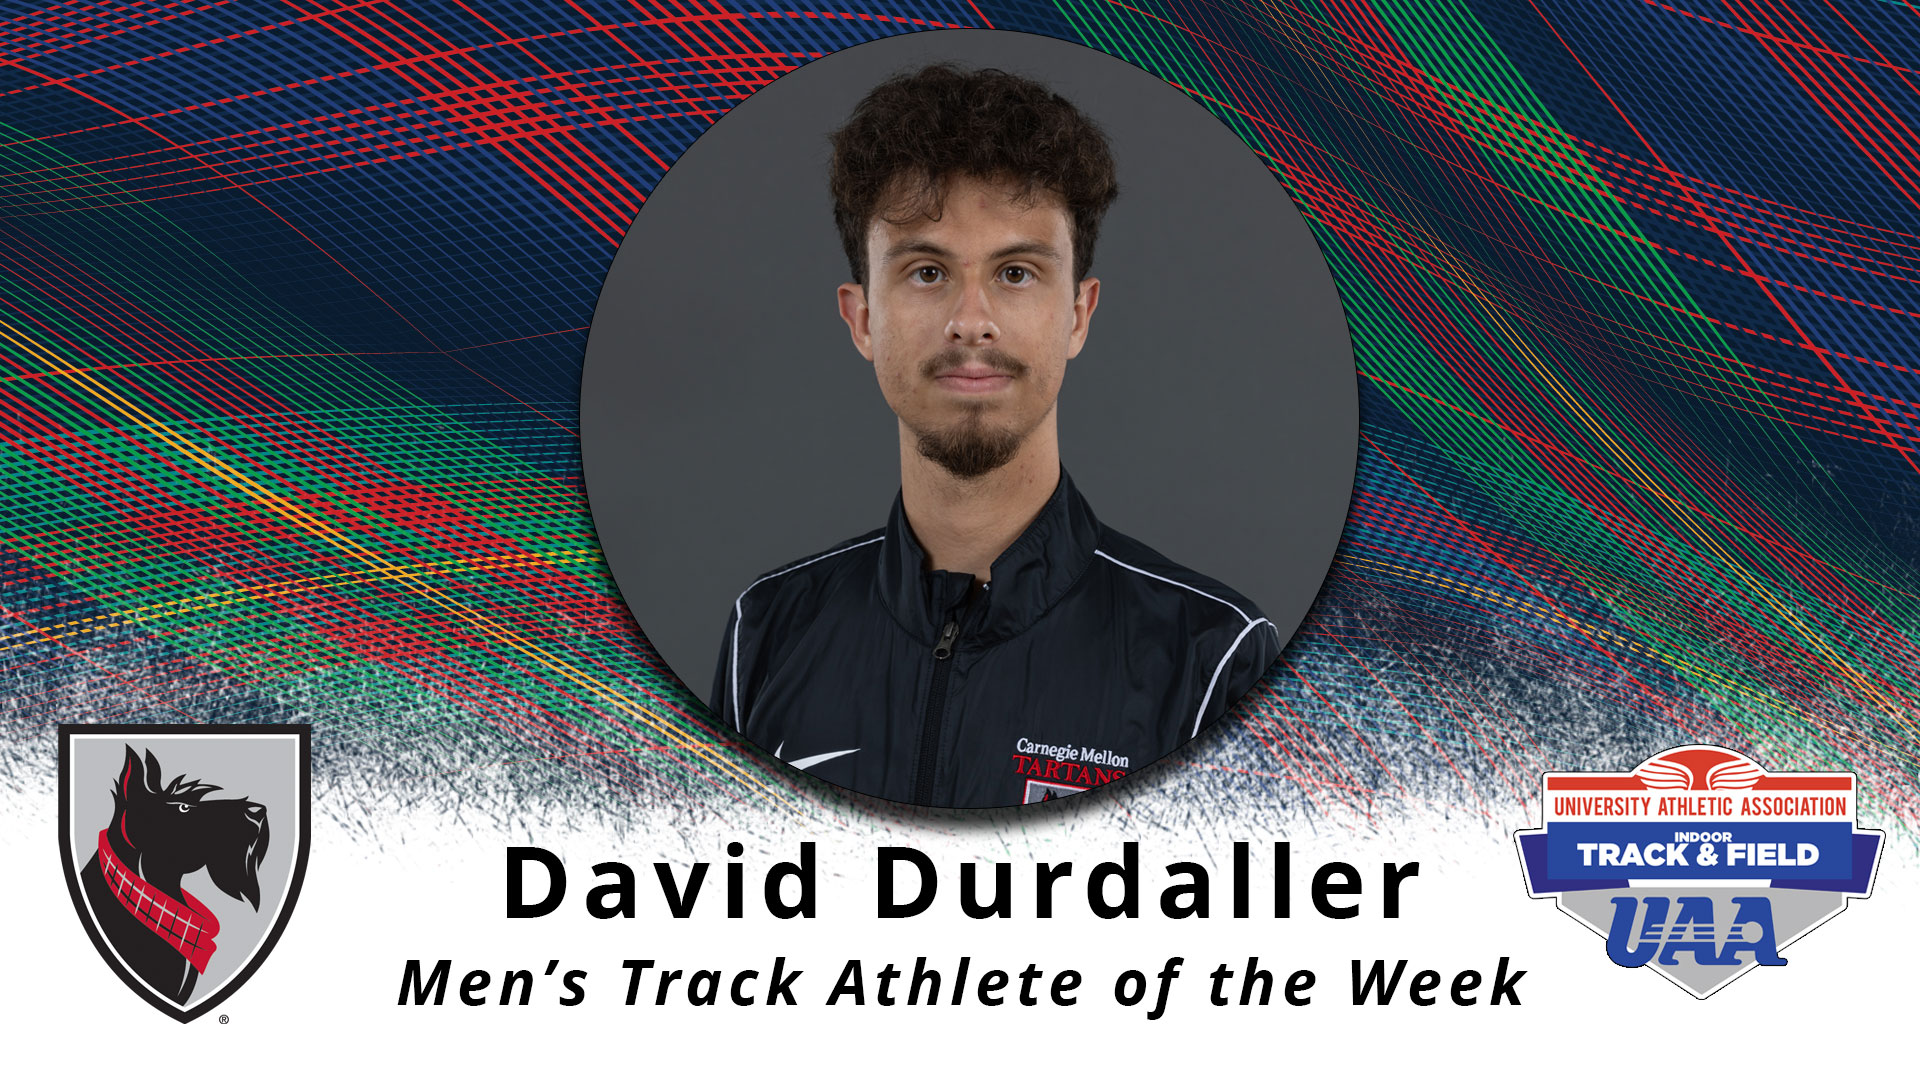 a portrait type photo of a male framed in a circle with text reading David Durdaller Men's Track Athlete of the Week